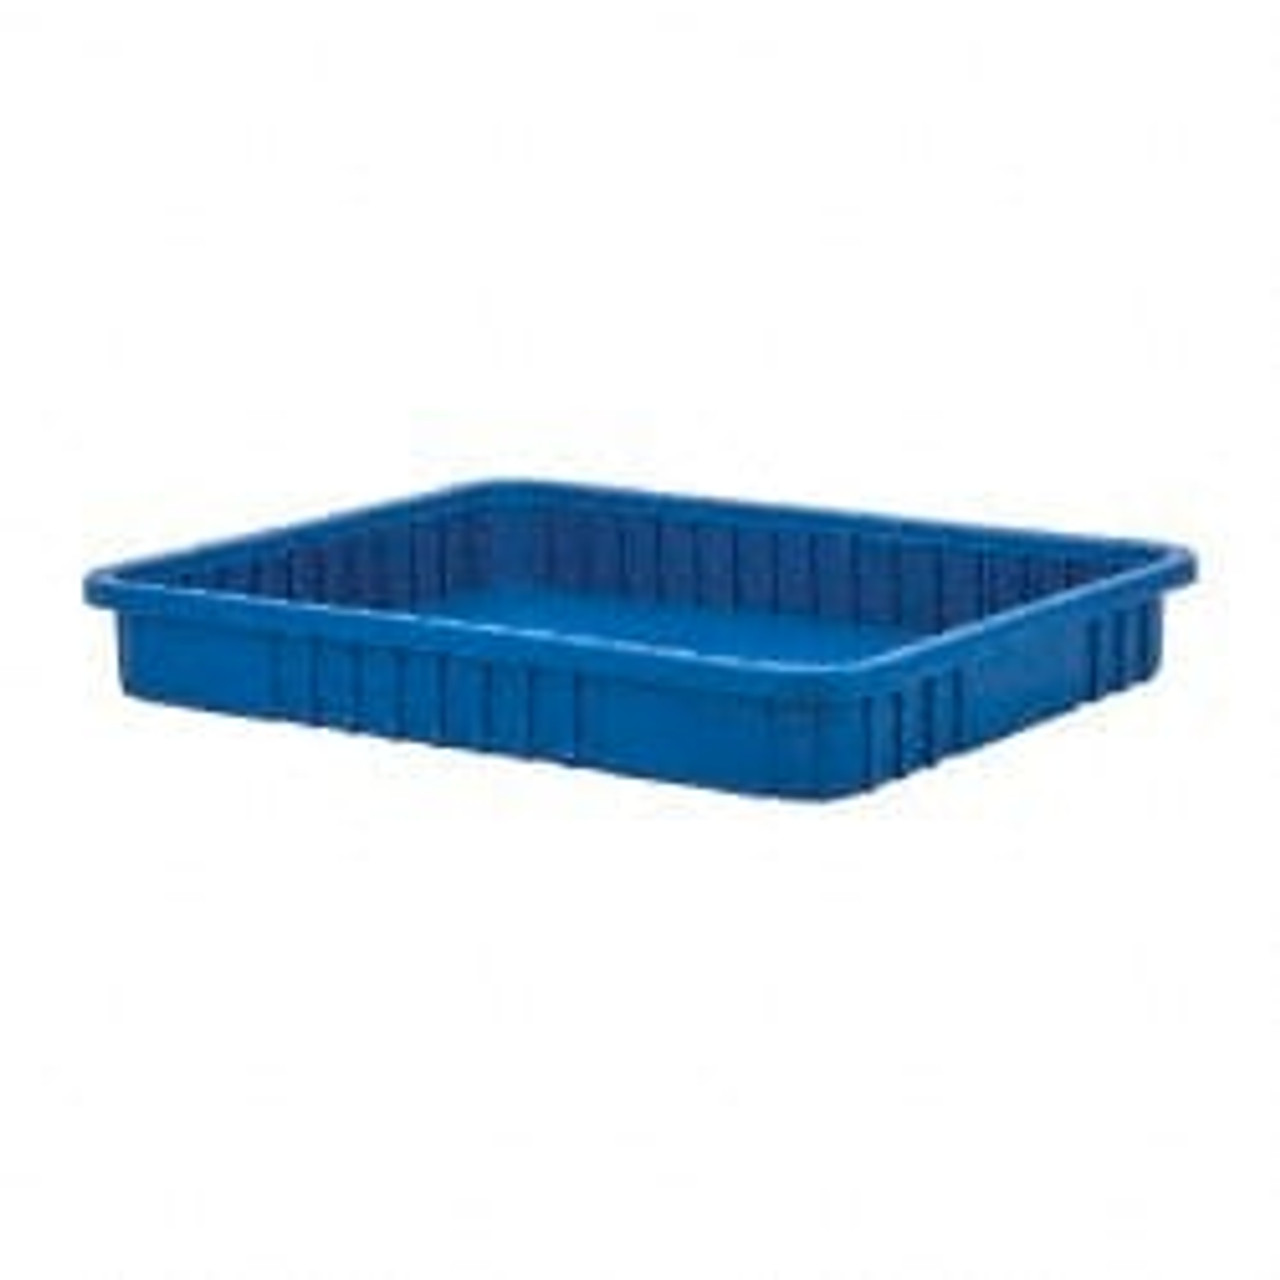 Quantum Storage Systems 100 lb Load Capacity Blue Polypropylene Dividable Container Stacking, 22-1/2 L x 17-1/2 W x 6 H DG93060BL - 86549896